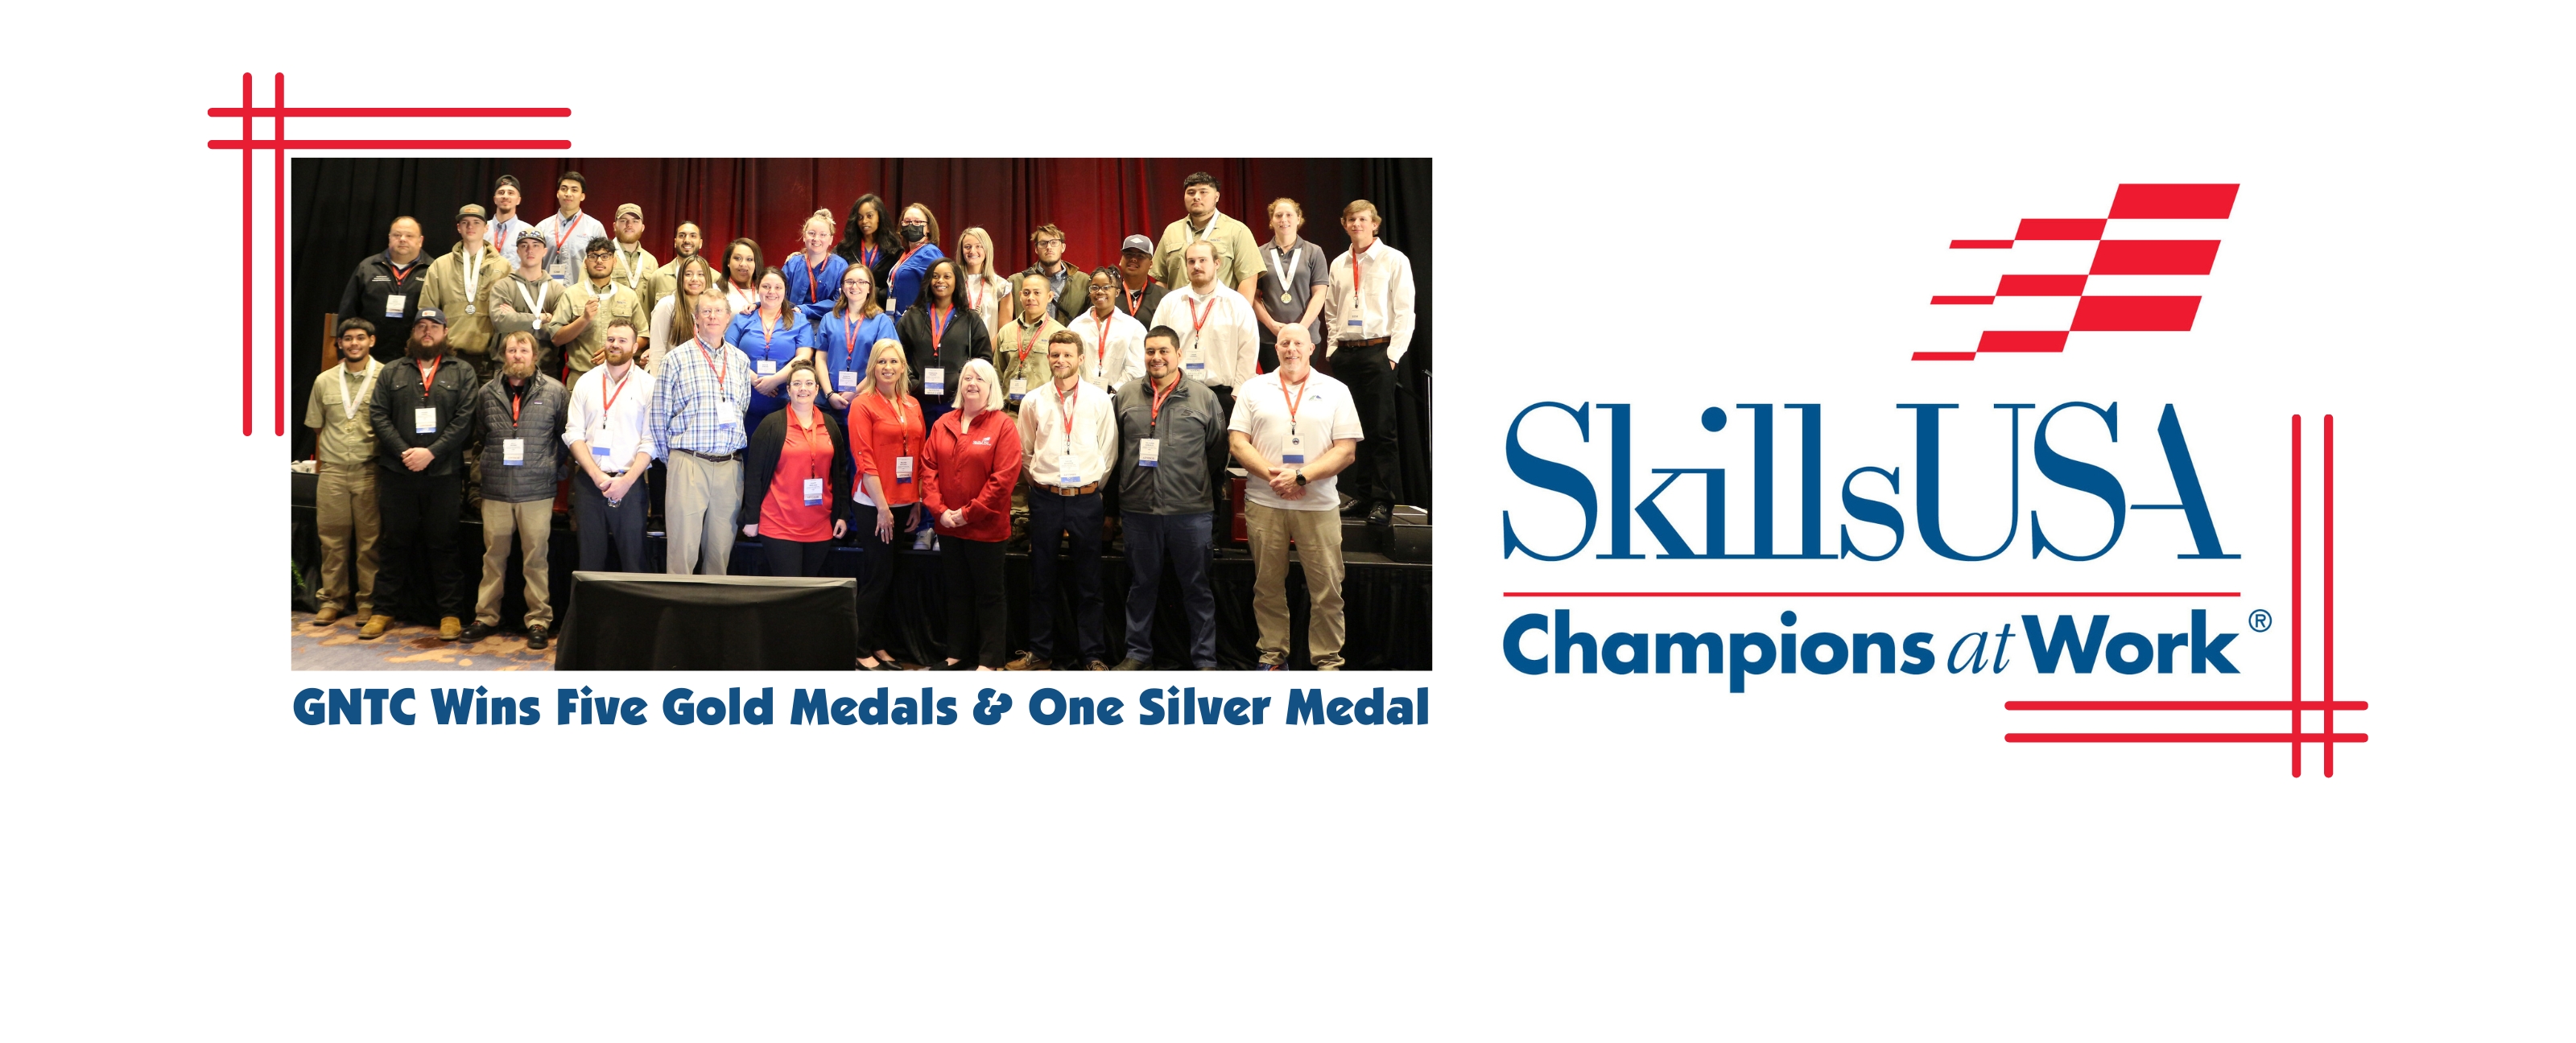 GNTC wins five gold medals and one silver medal at SkillsUSA